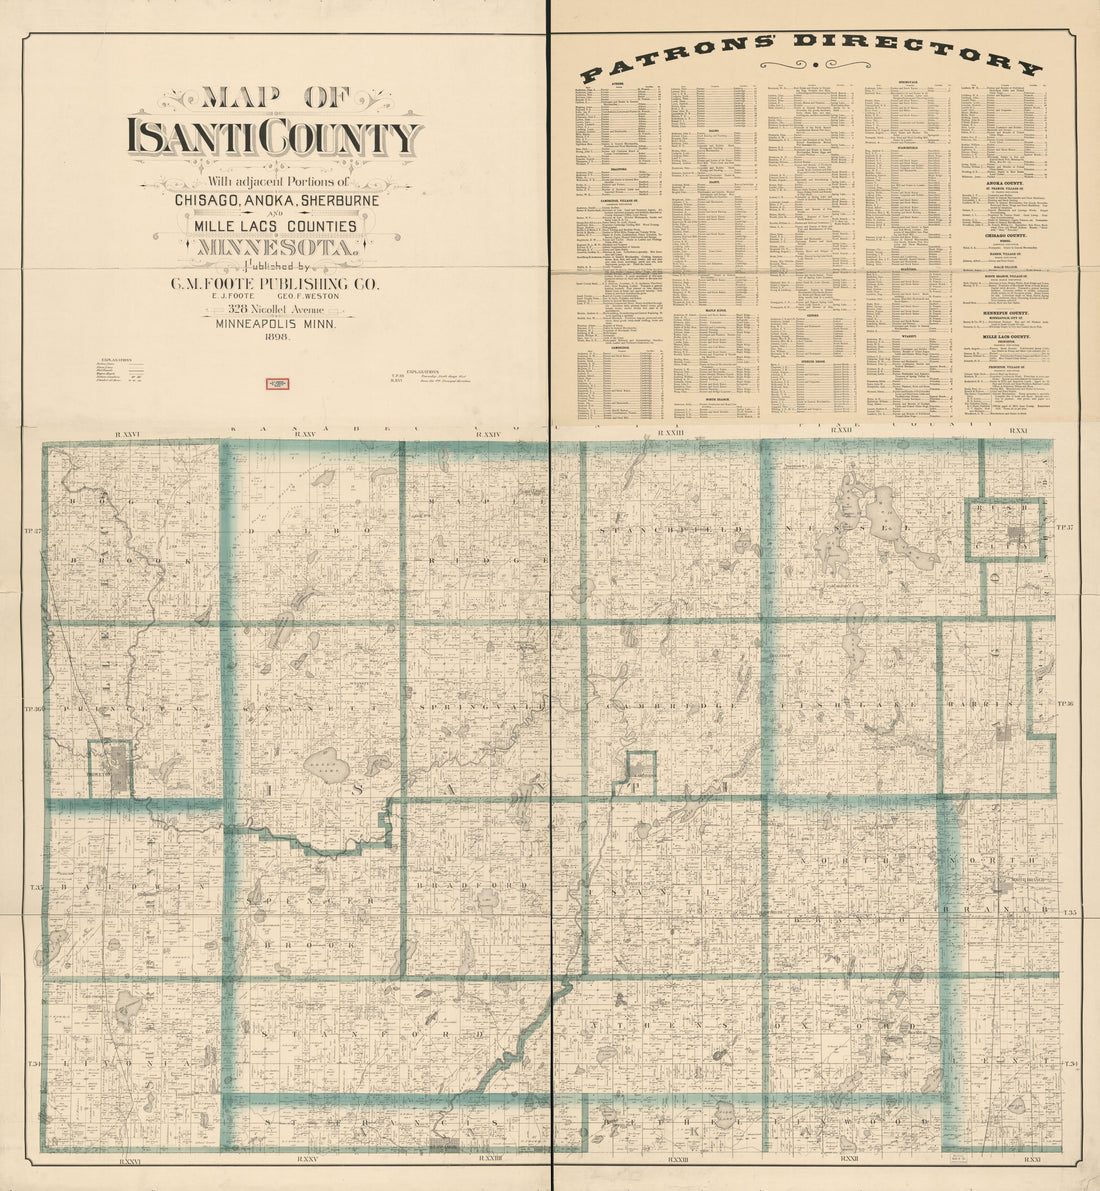 This old map of Map of Isanti County : With Adjacent Portions of Chisago, Anoka, Sherburne, and Mille Lacs Counties, Minnesota from 1898 was created by Minn.) C.M. Foote &amp; Co. (Minneapolis in 1898